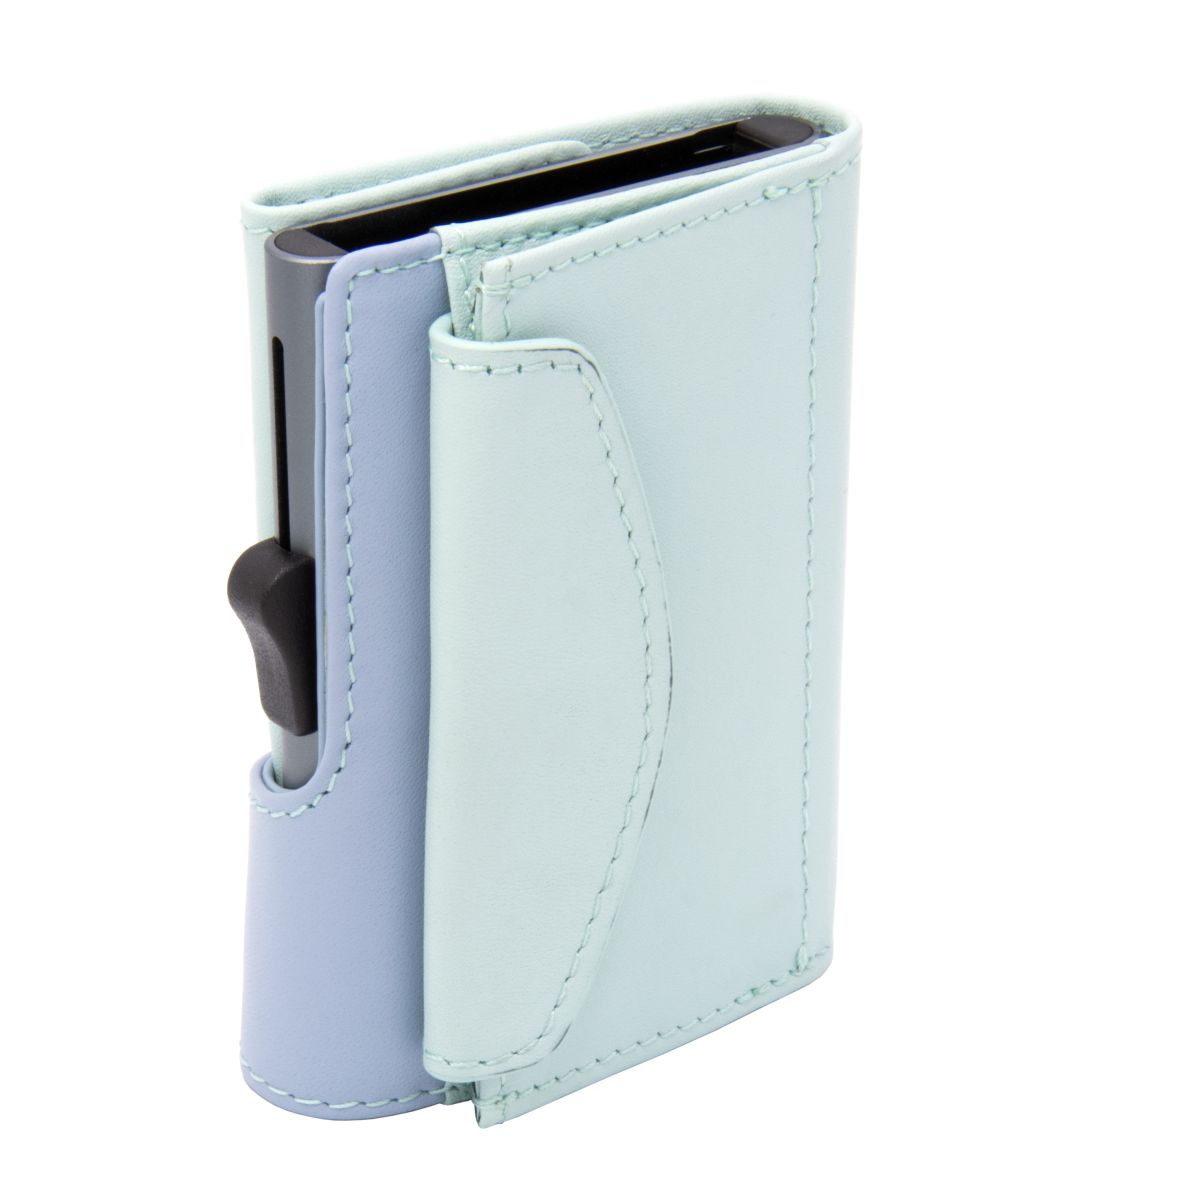 XL Aluminum Wallet with Genuine Leather and Coins Pocket - Aqua/Ice